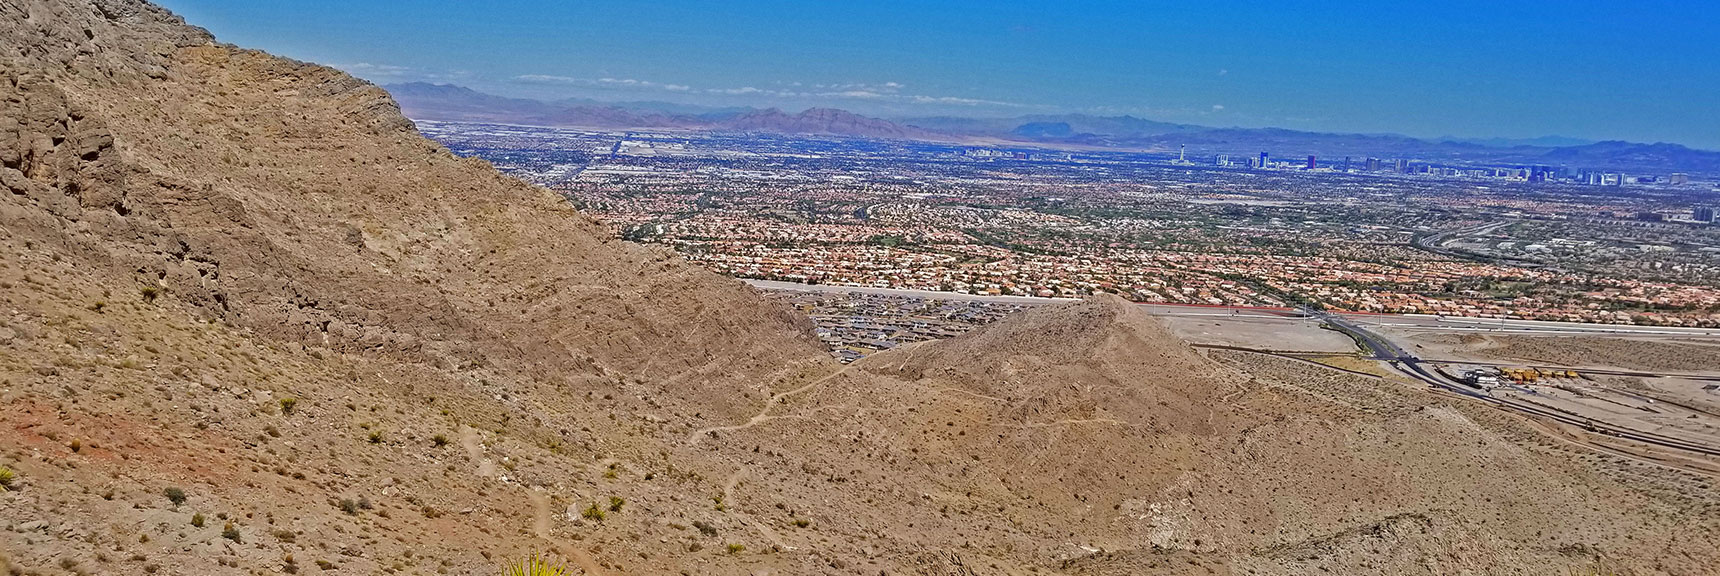 Final Stretch Back to Upper End of Lake Mead Blvd. Las Vegas Valley Background. | Little La Madre Mt, Little El Padre Mt, Little Burnt Peak | Near La Madre Mountains Wilderness, Nevada